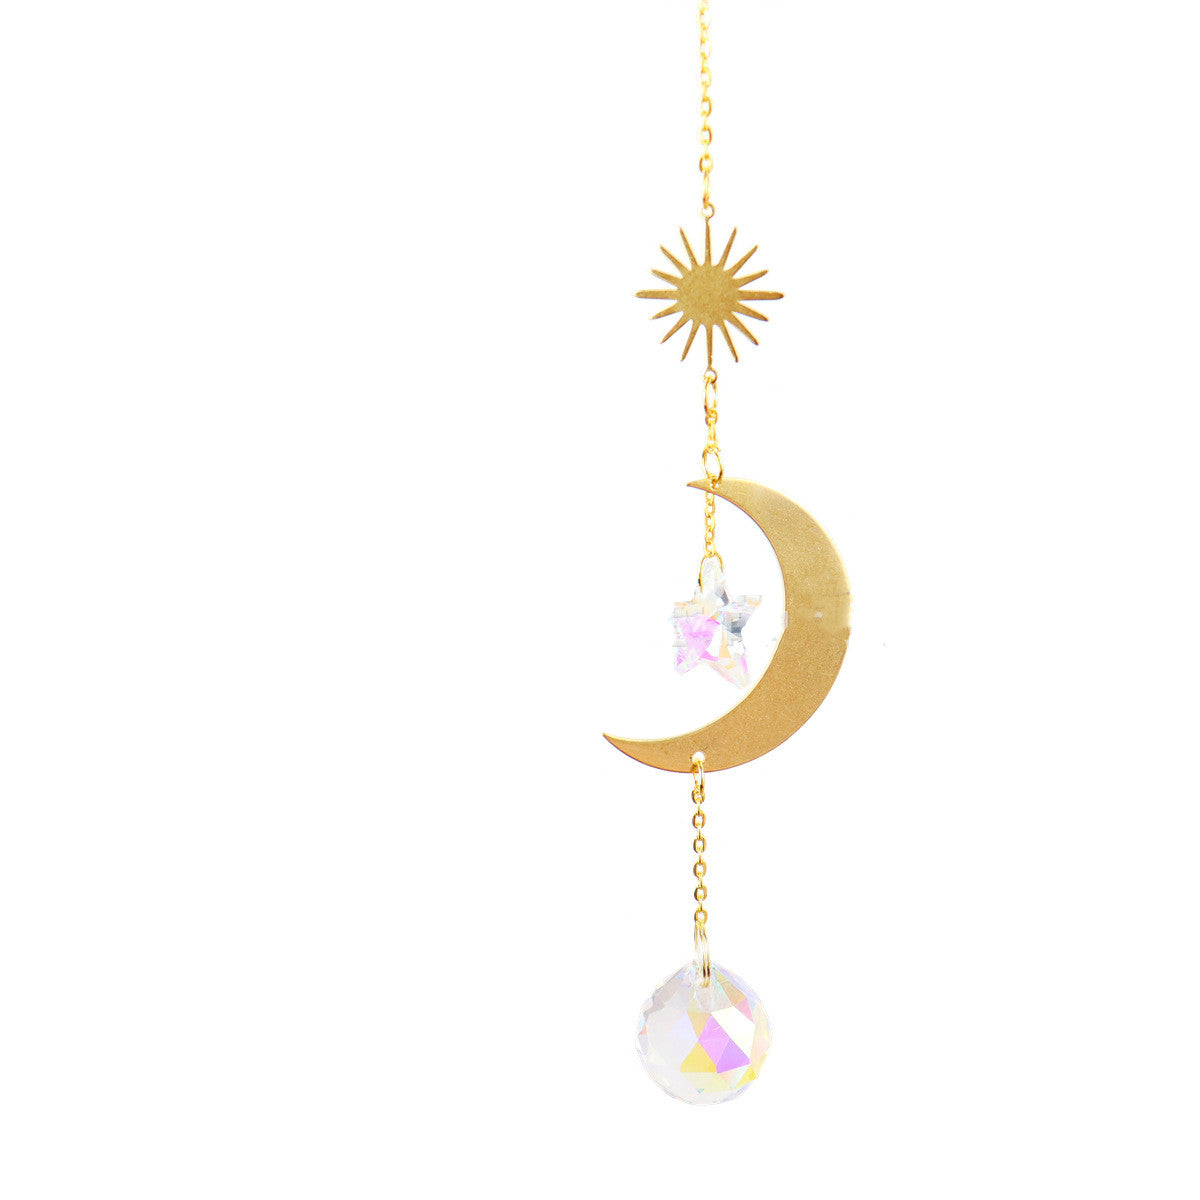 A Celestial Crystal Wind Chimes